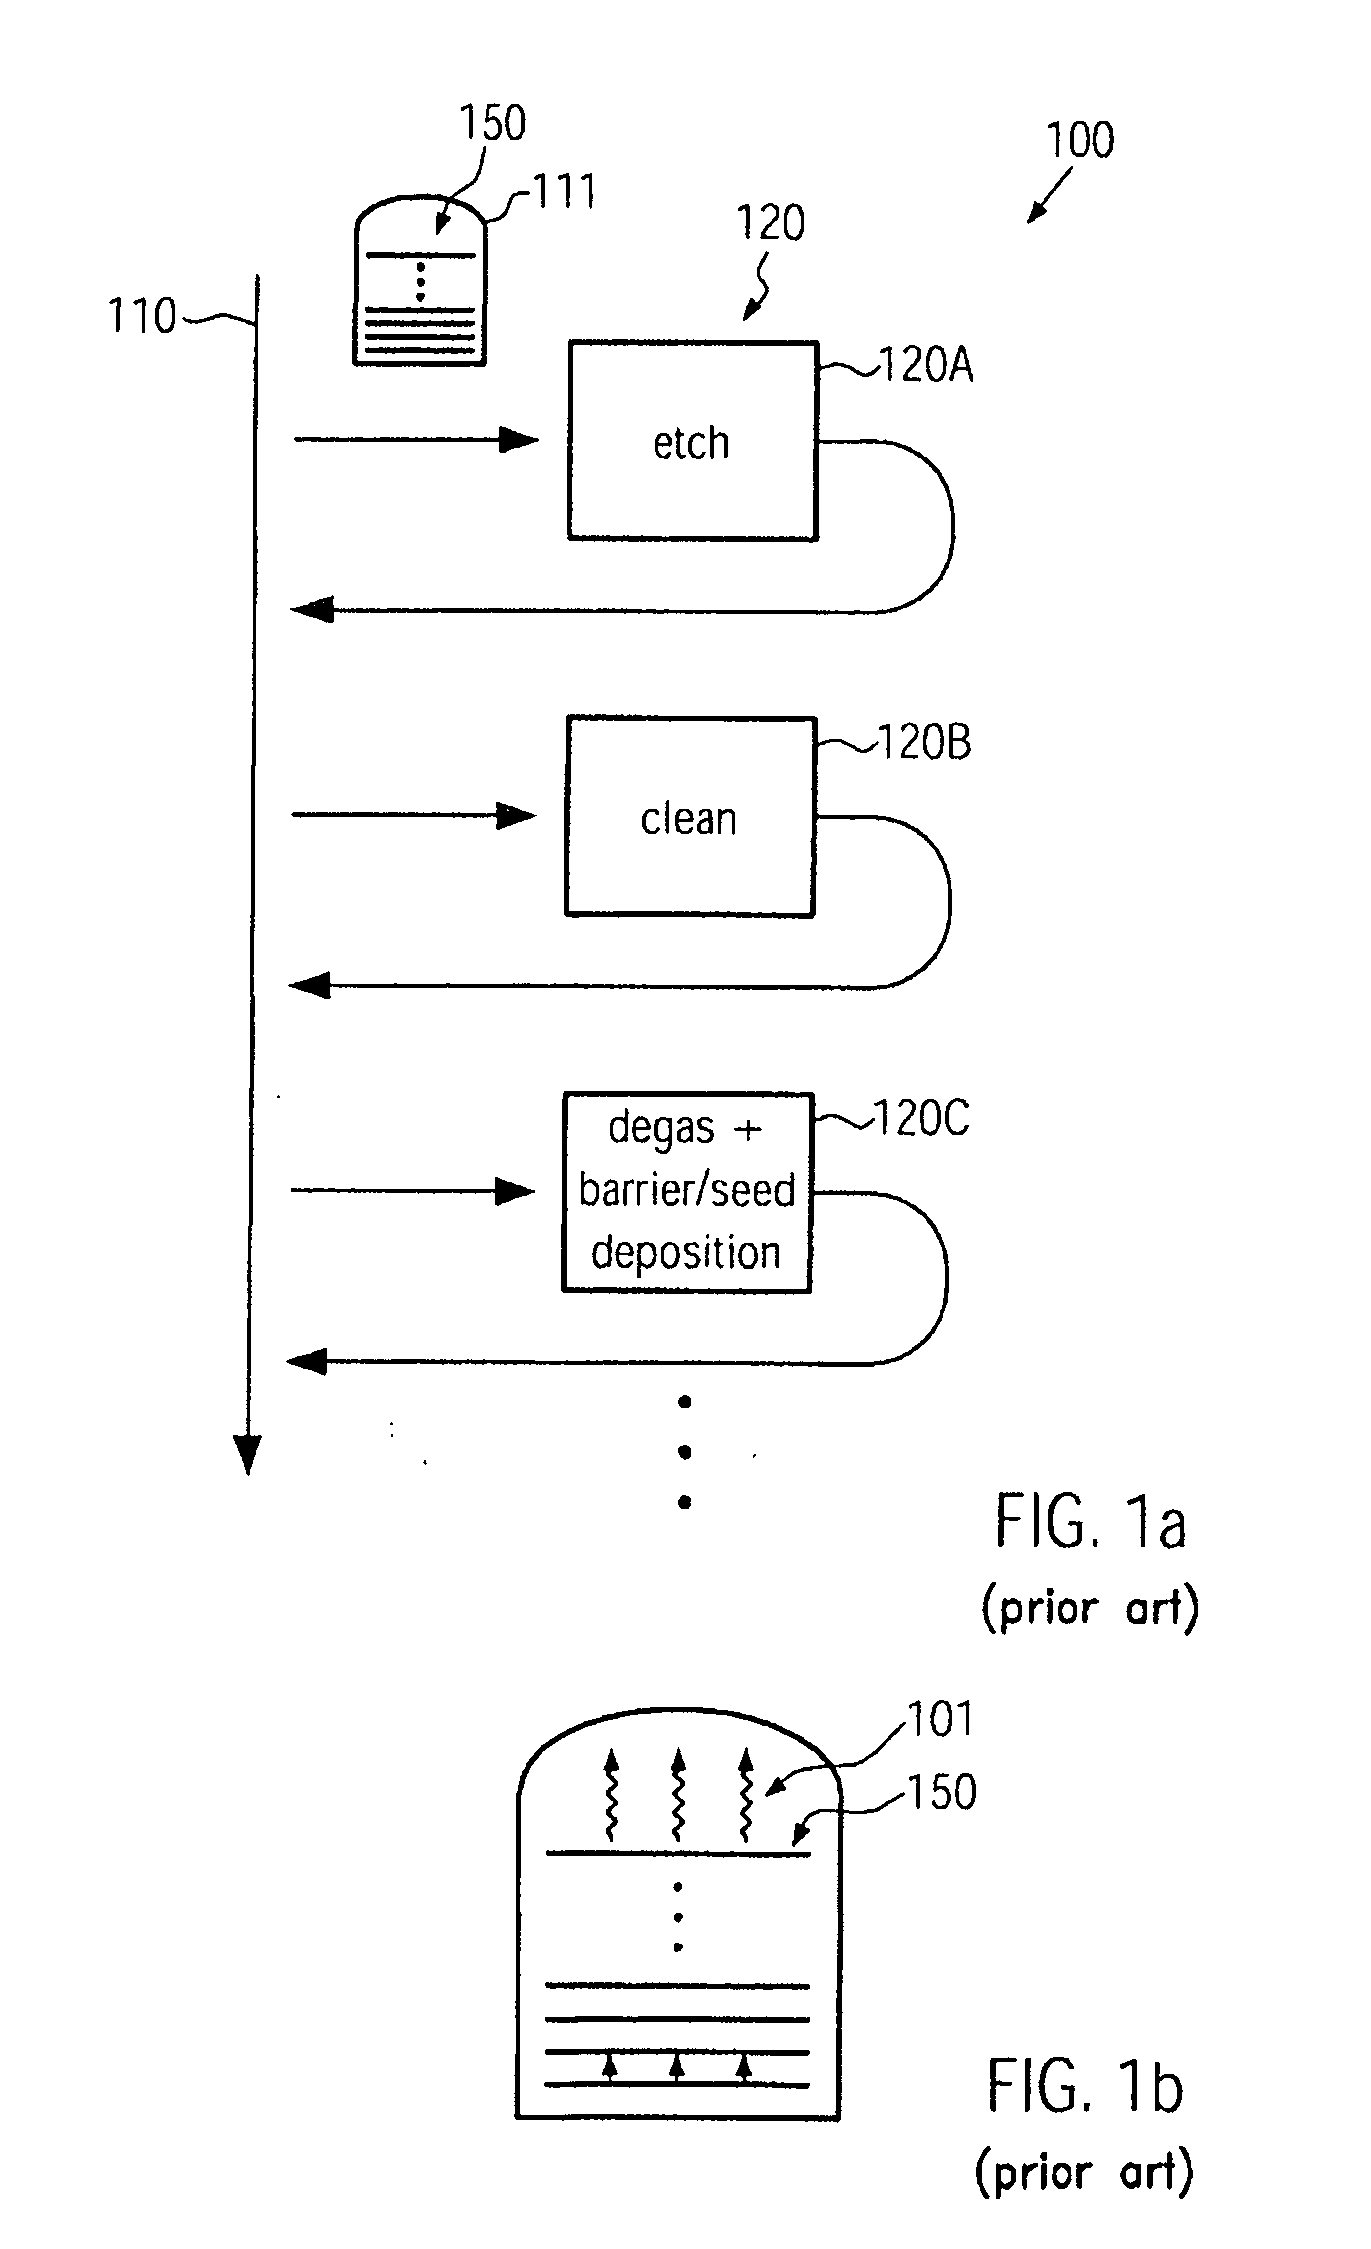 Method for reducing metal irregularities in advanced metallization systems of semiconductor devices